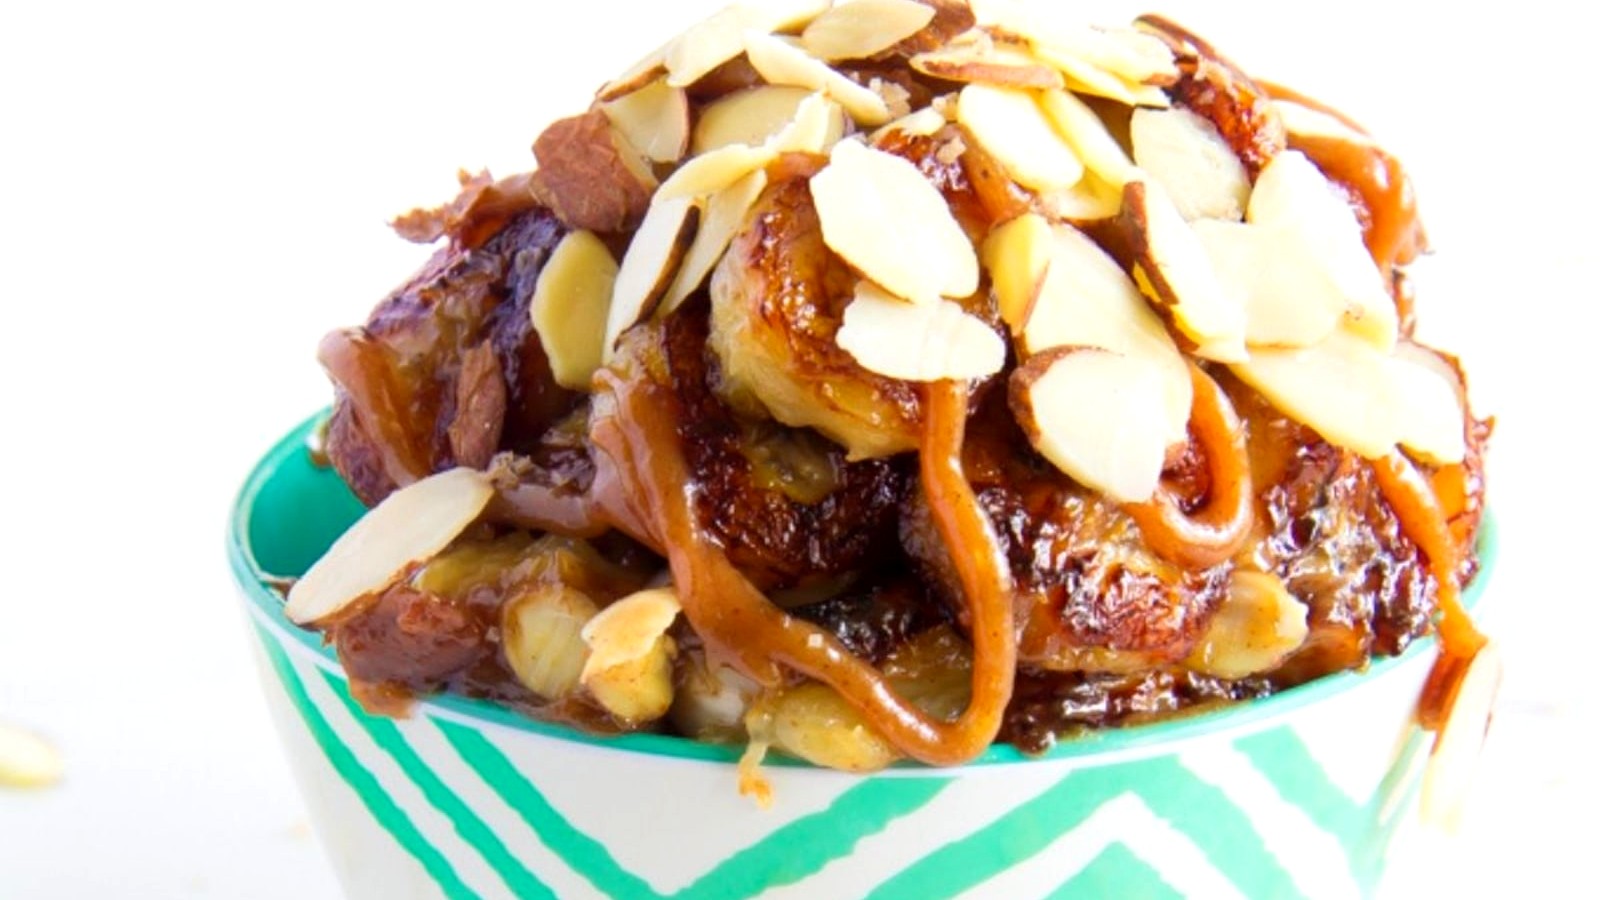 Image of Banana Bowls with Almond Butter Caramel